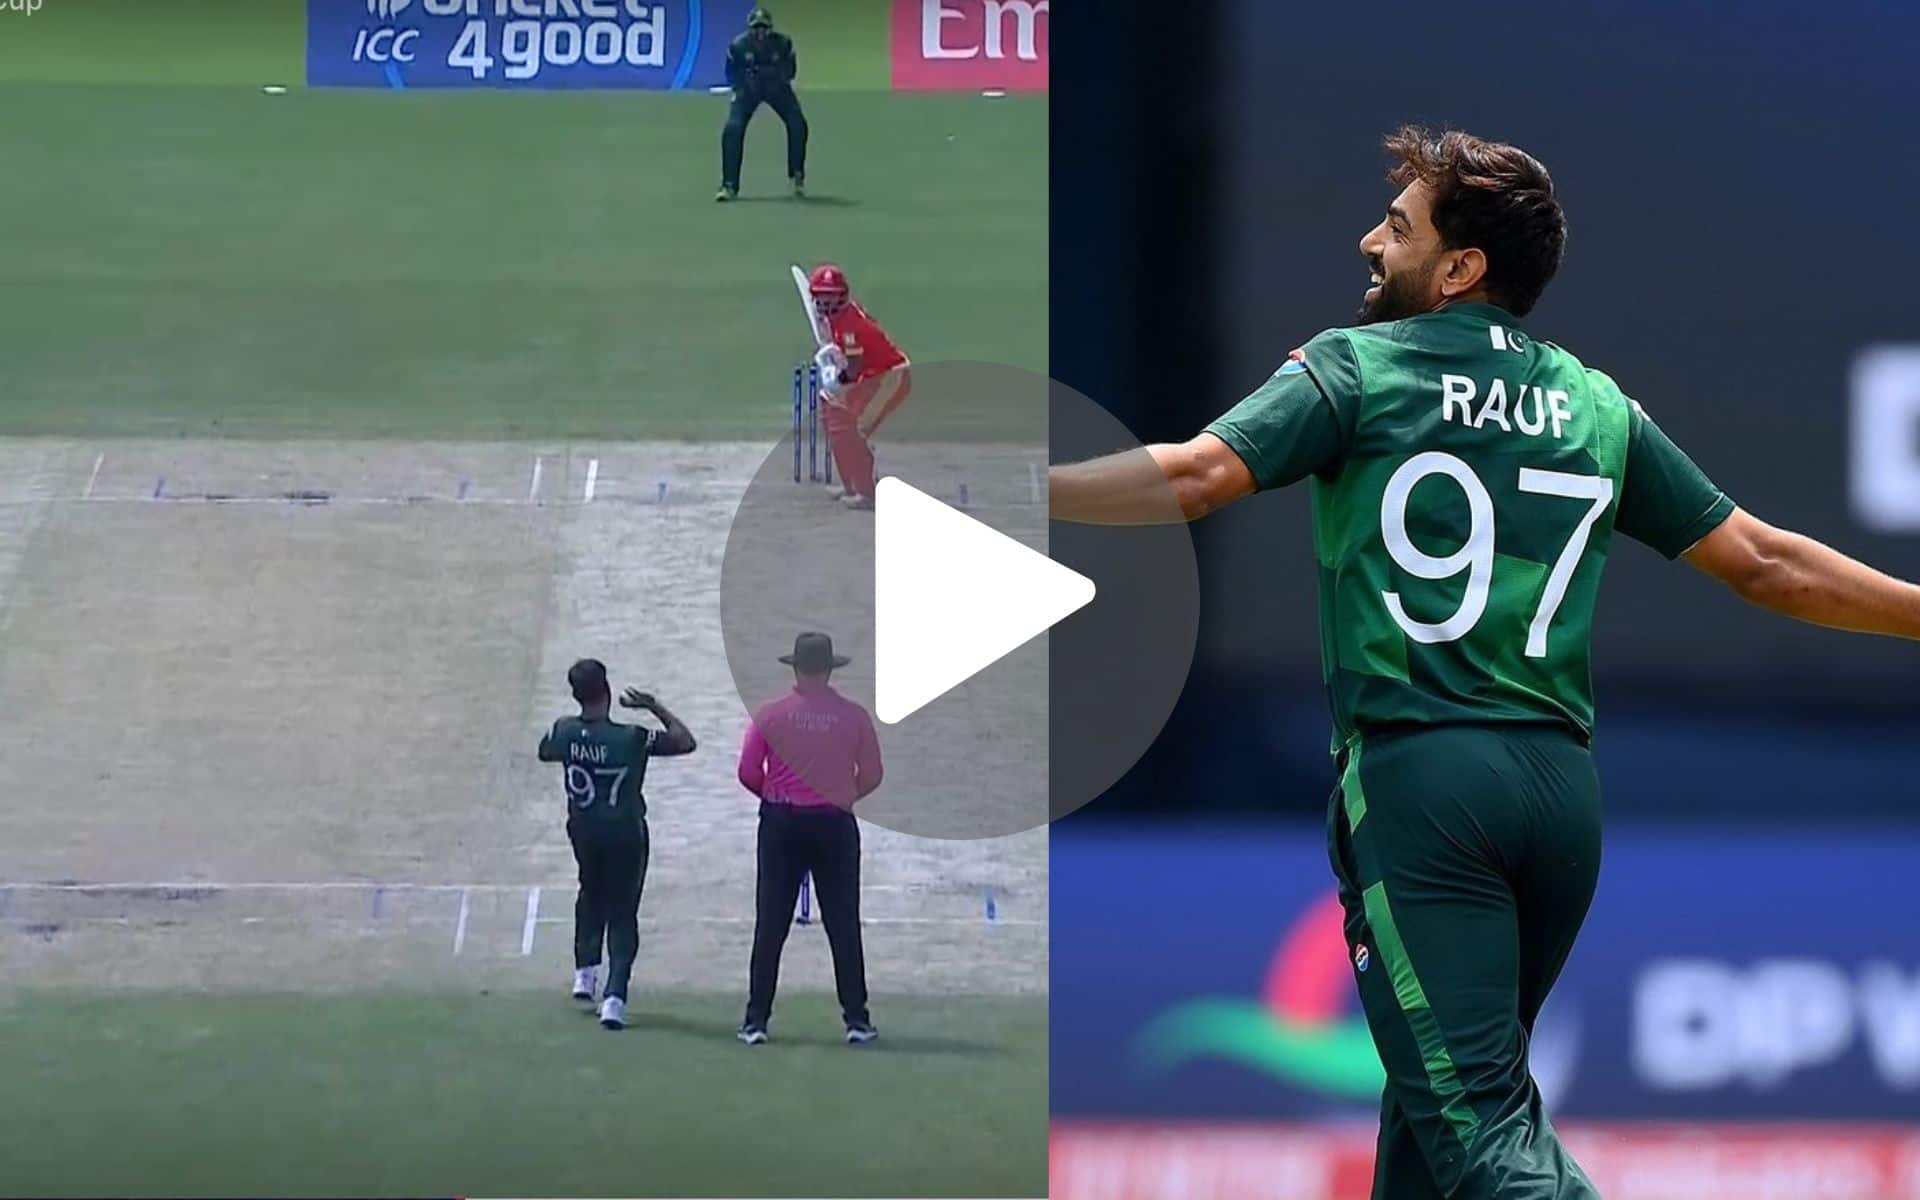 [Watch] Rauf Leaves Canada Crippled With Two Wickets In One Over; Surpasses Malinga For A Special Feat